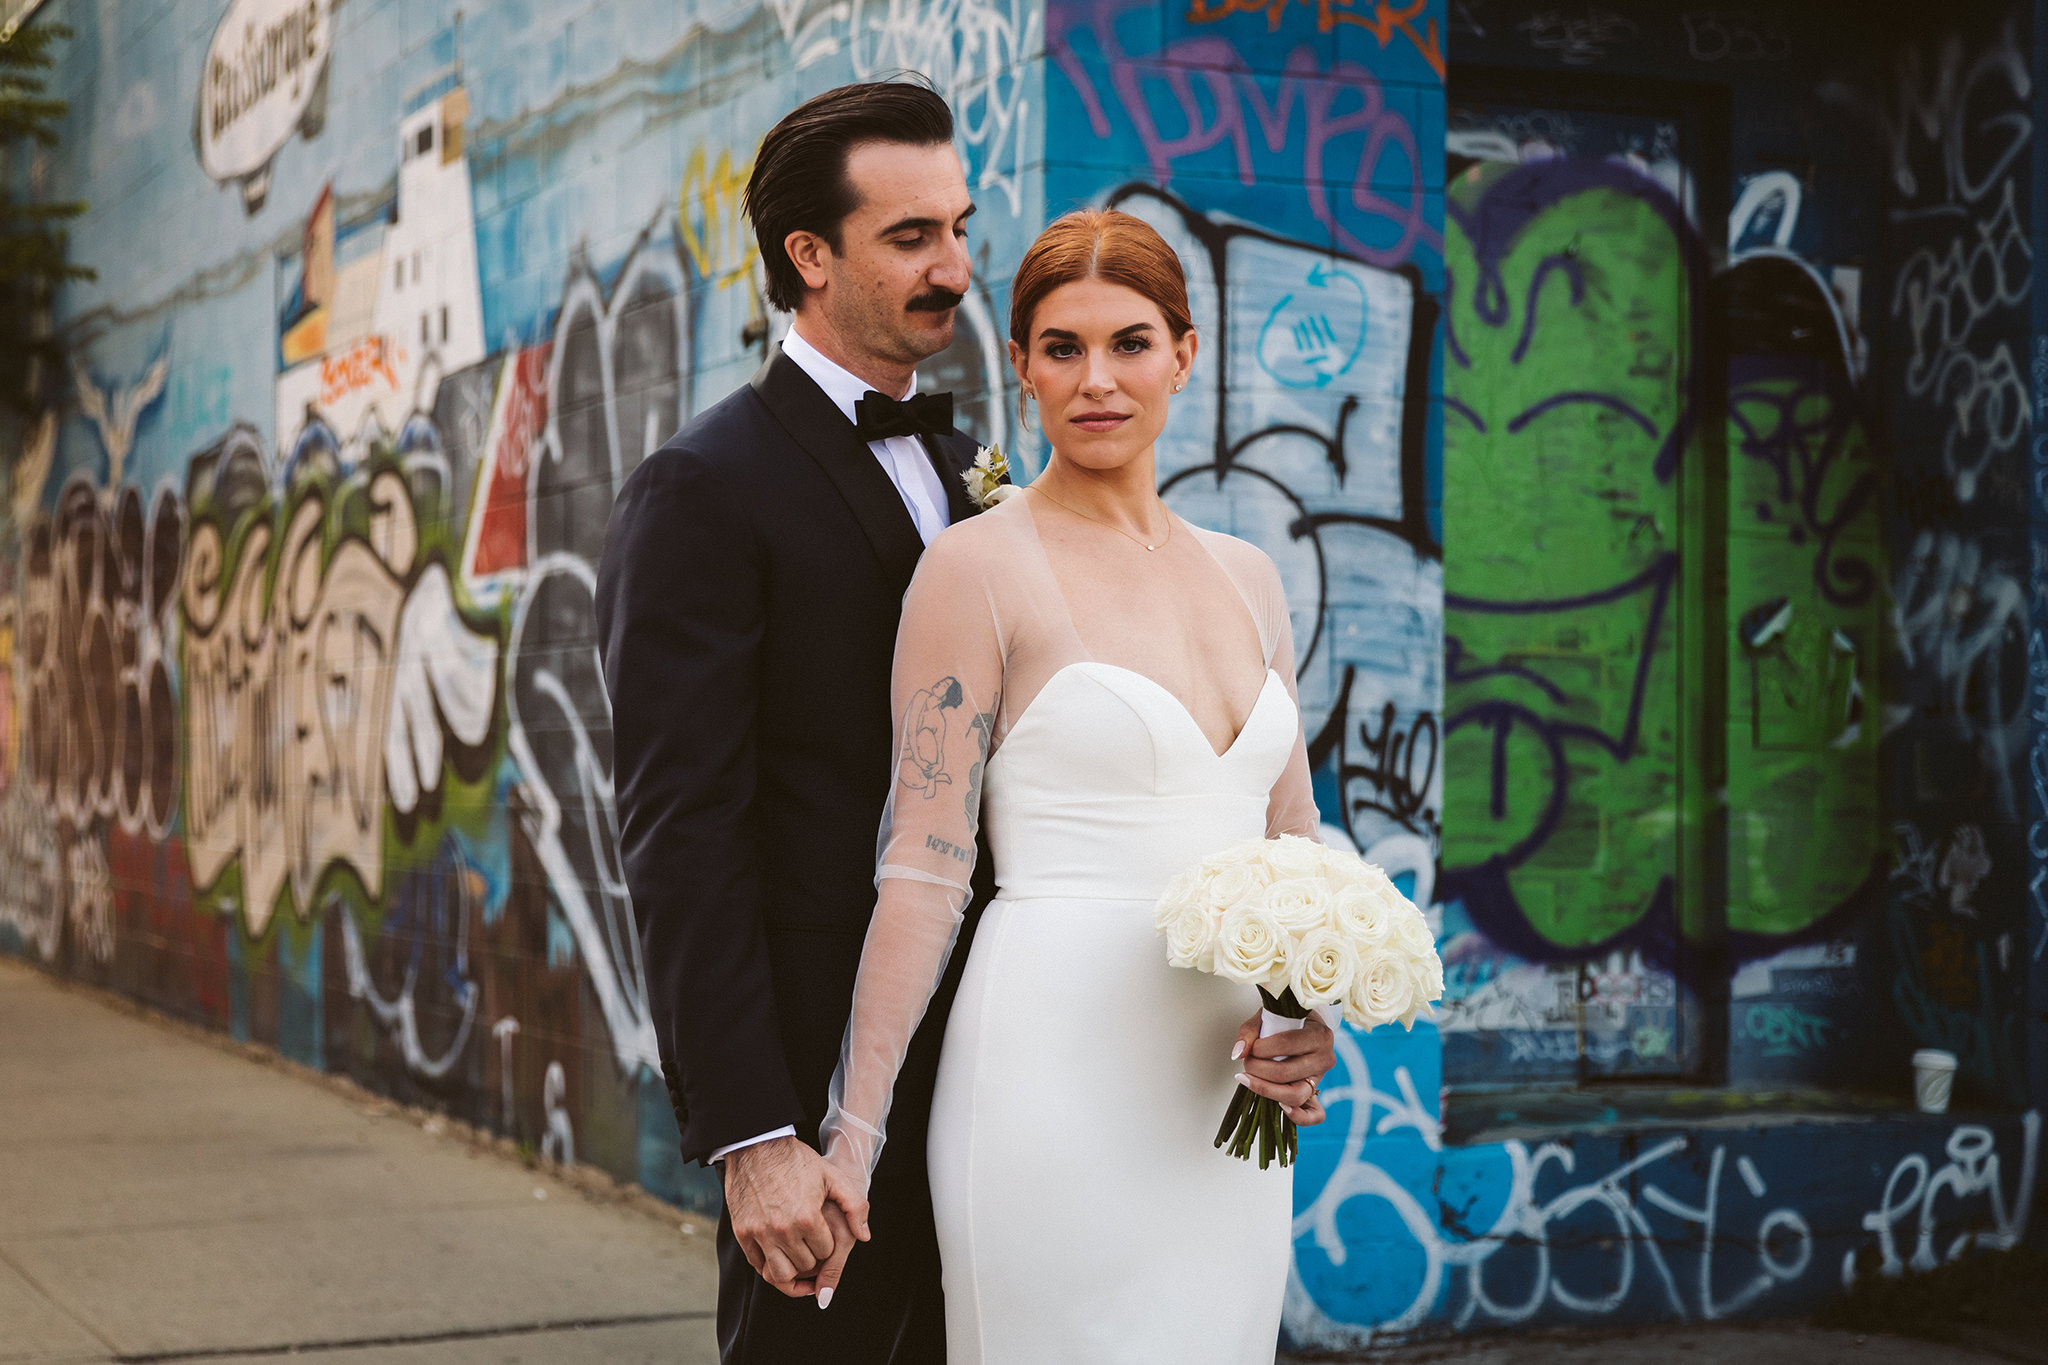 A portrait of a bride and groom in front of graffiti during their Williamsburg wedding in Brooklyn